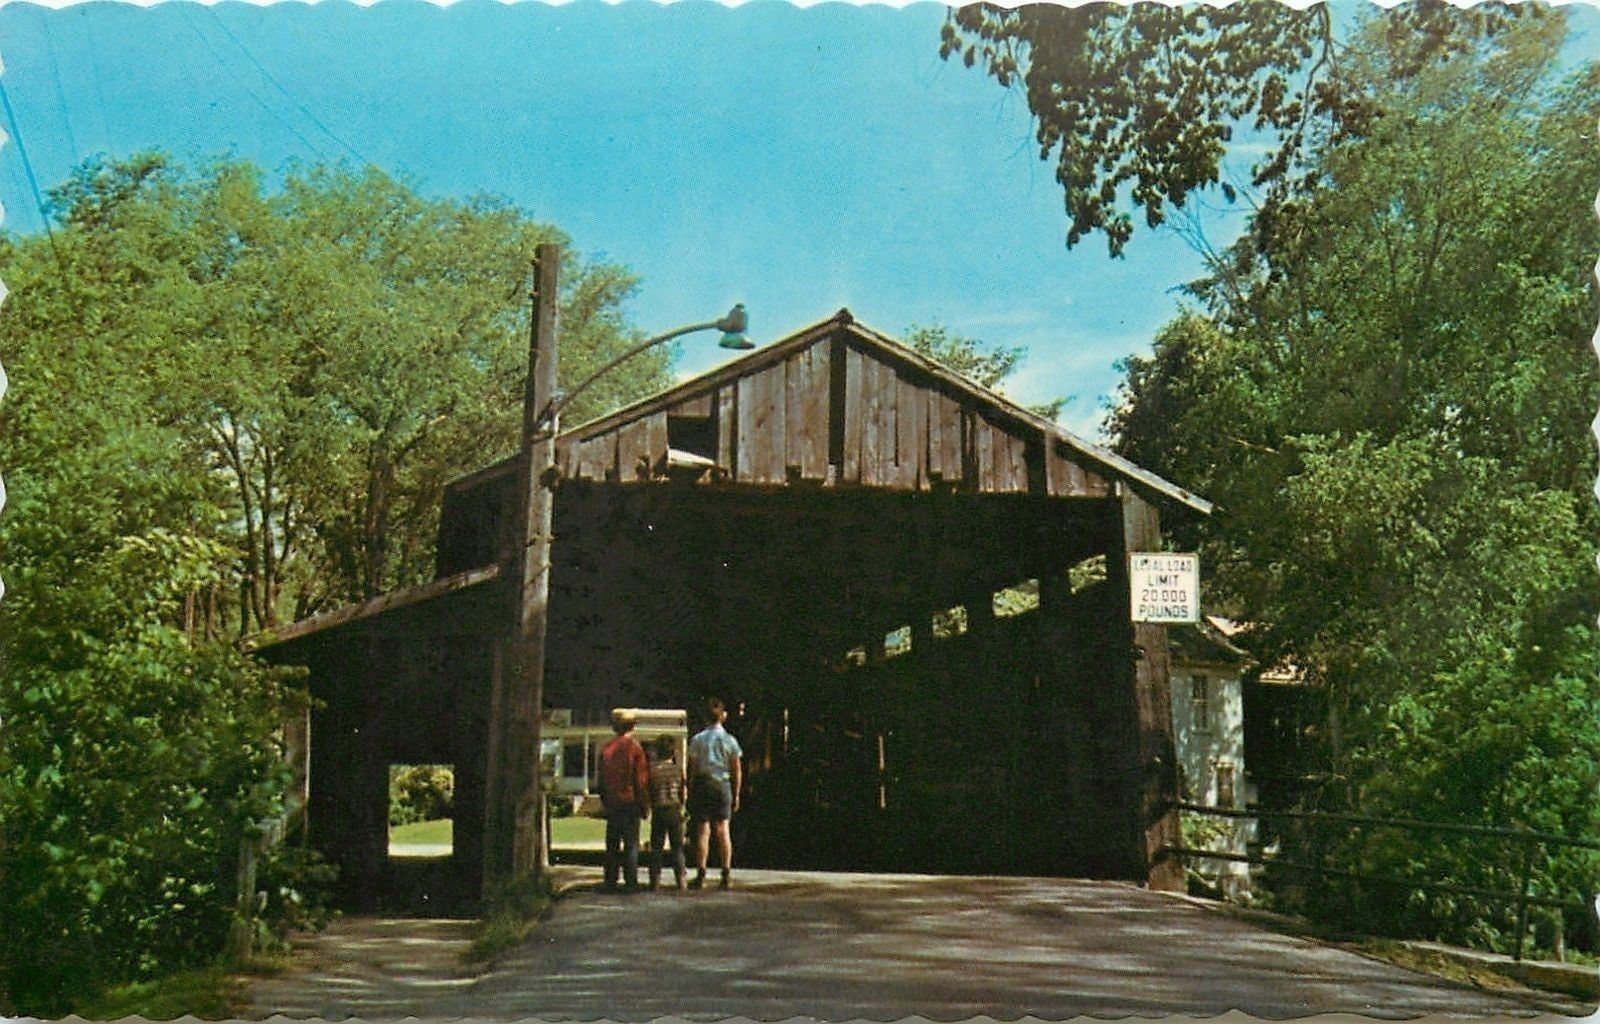 Waitsfield Vermont~Boys Looking at Old Covered Bridge 1950s Postcard